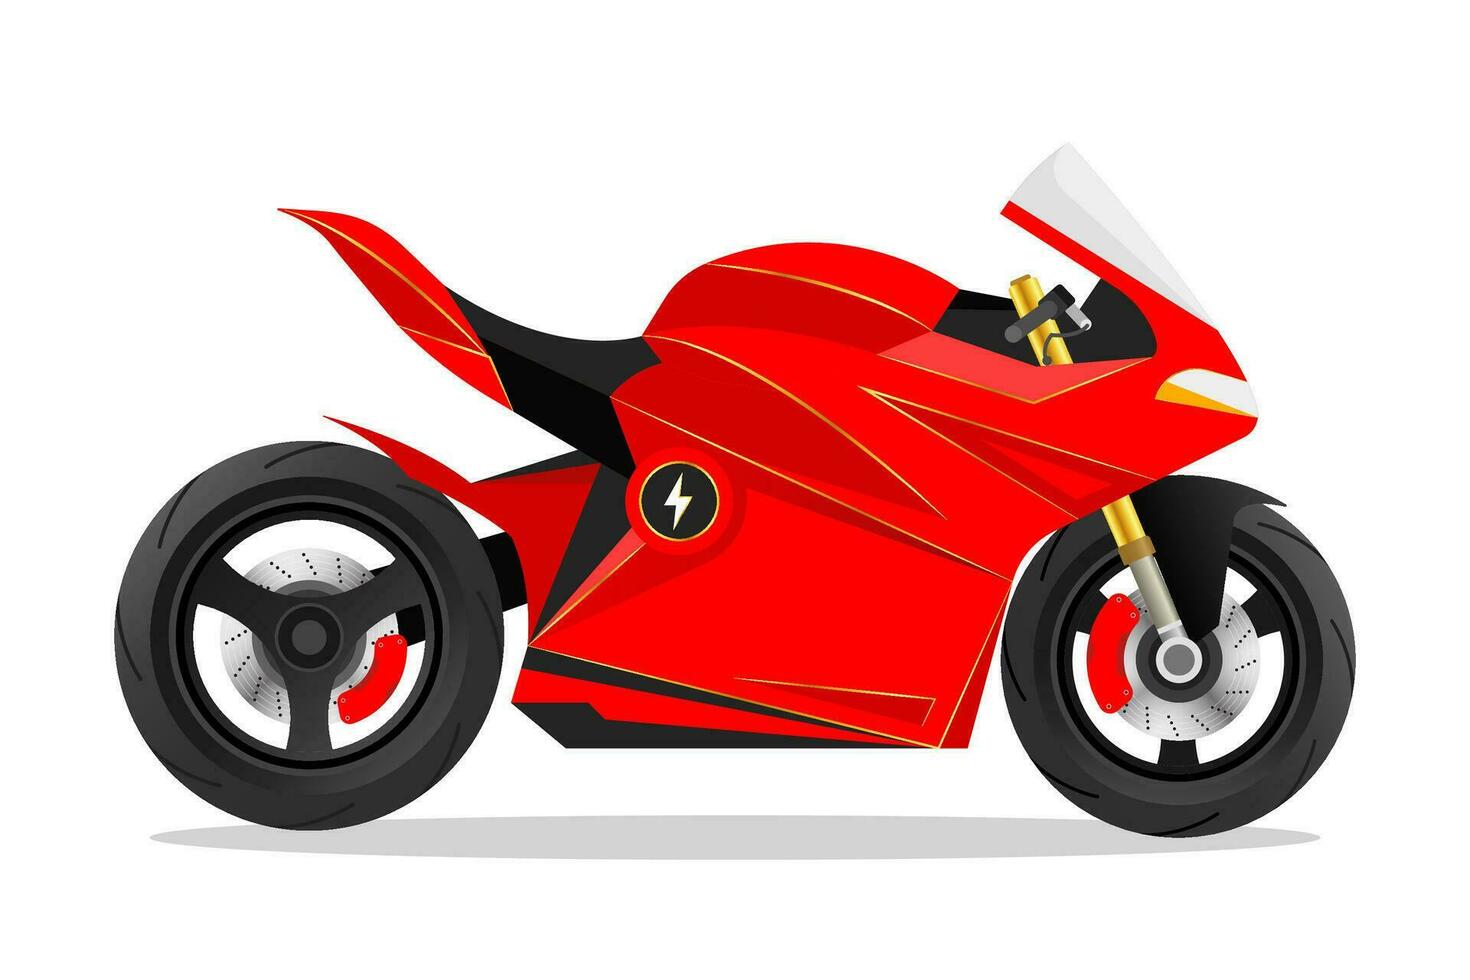 Motocycle full electric bike red  illustration vector